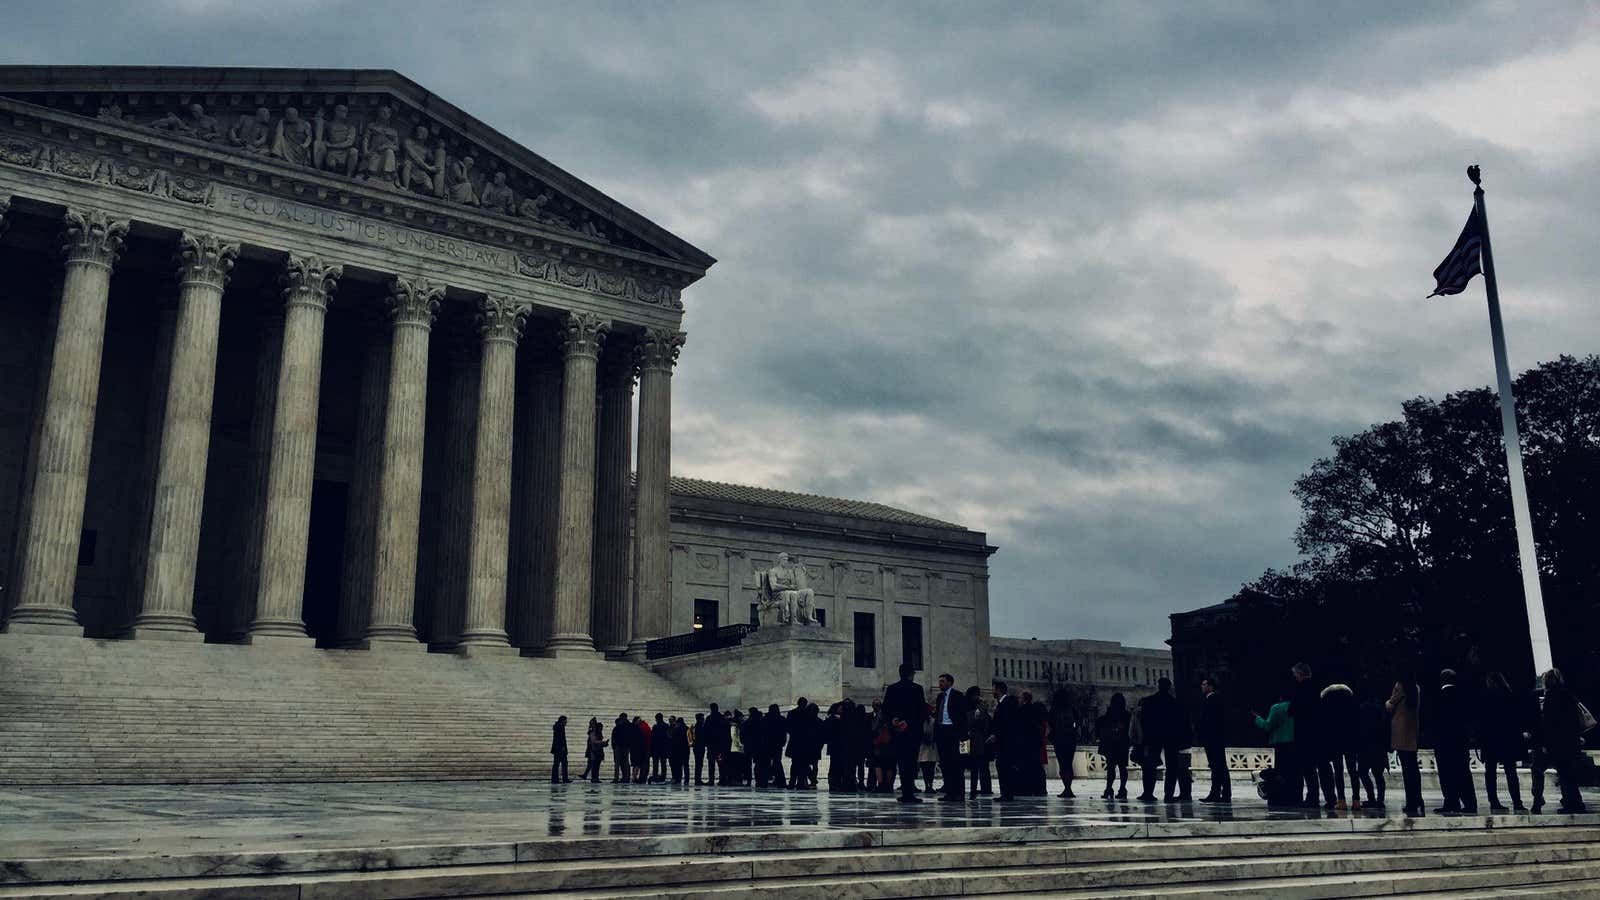 Cloudy weather ahead for the US Supreme Court.